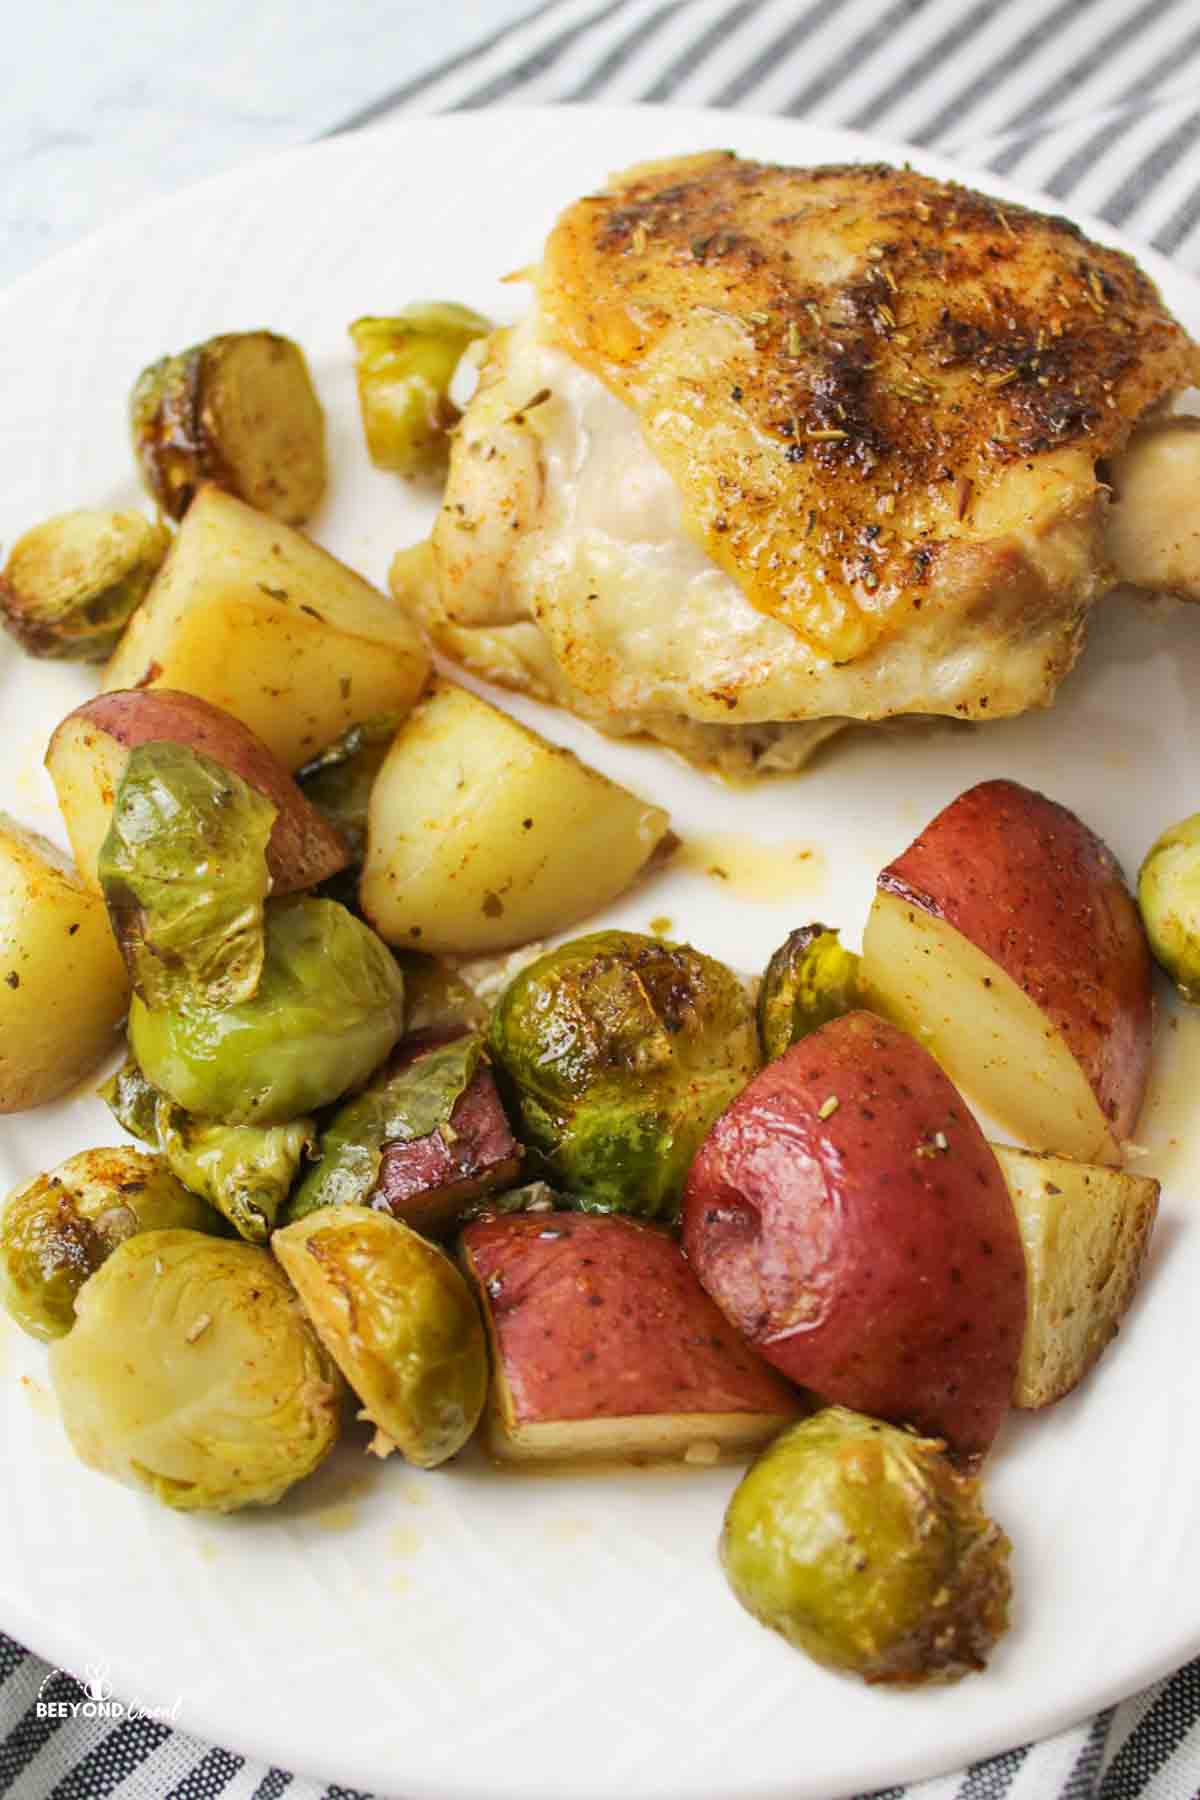 chicken thigh, brussel sprouts, and red potatoes on a white dinner plate.